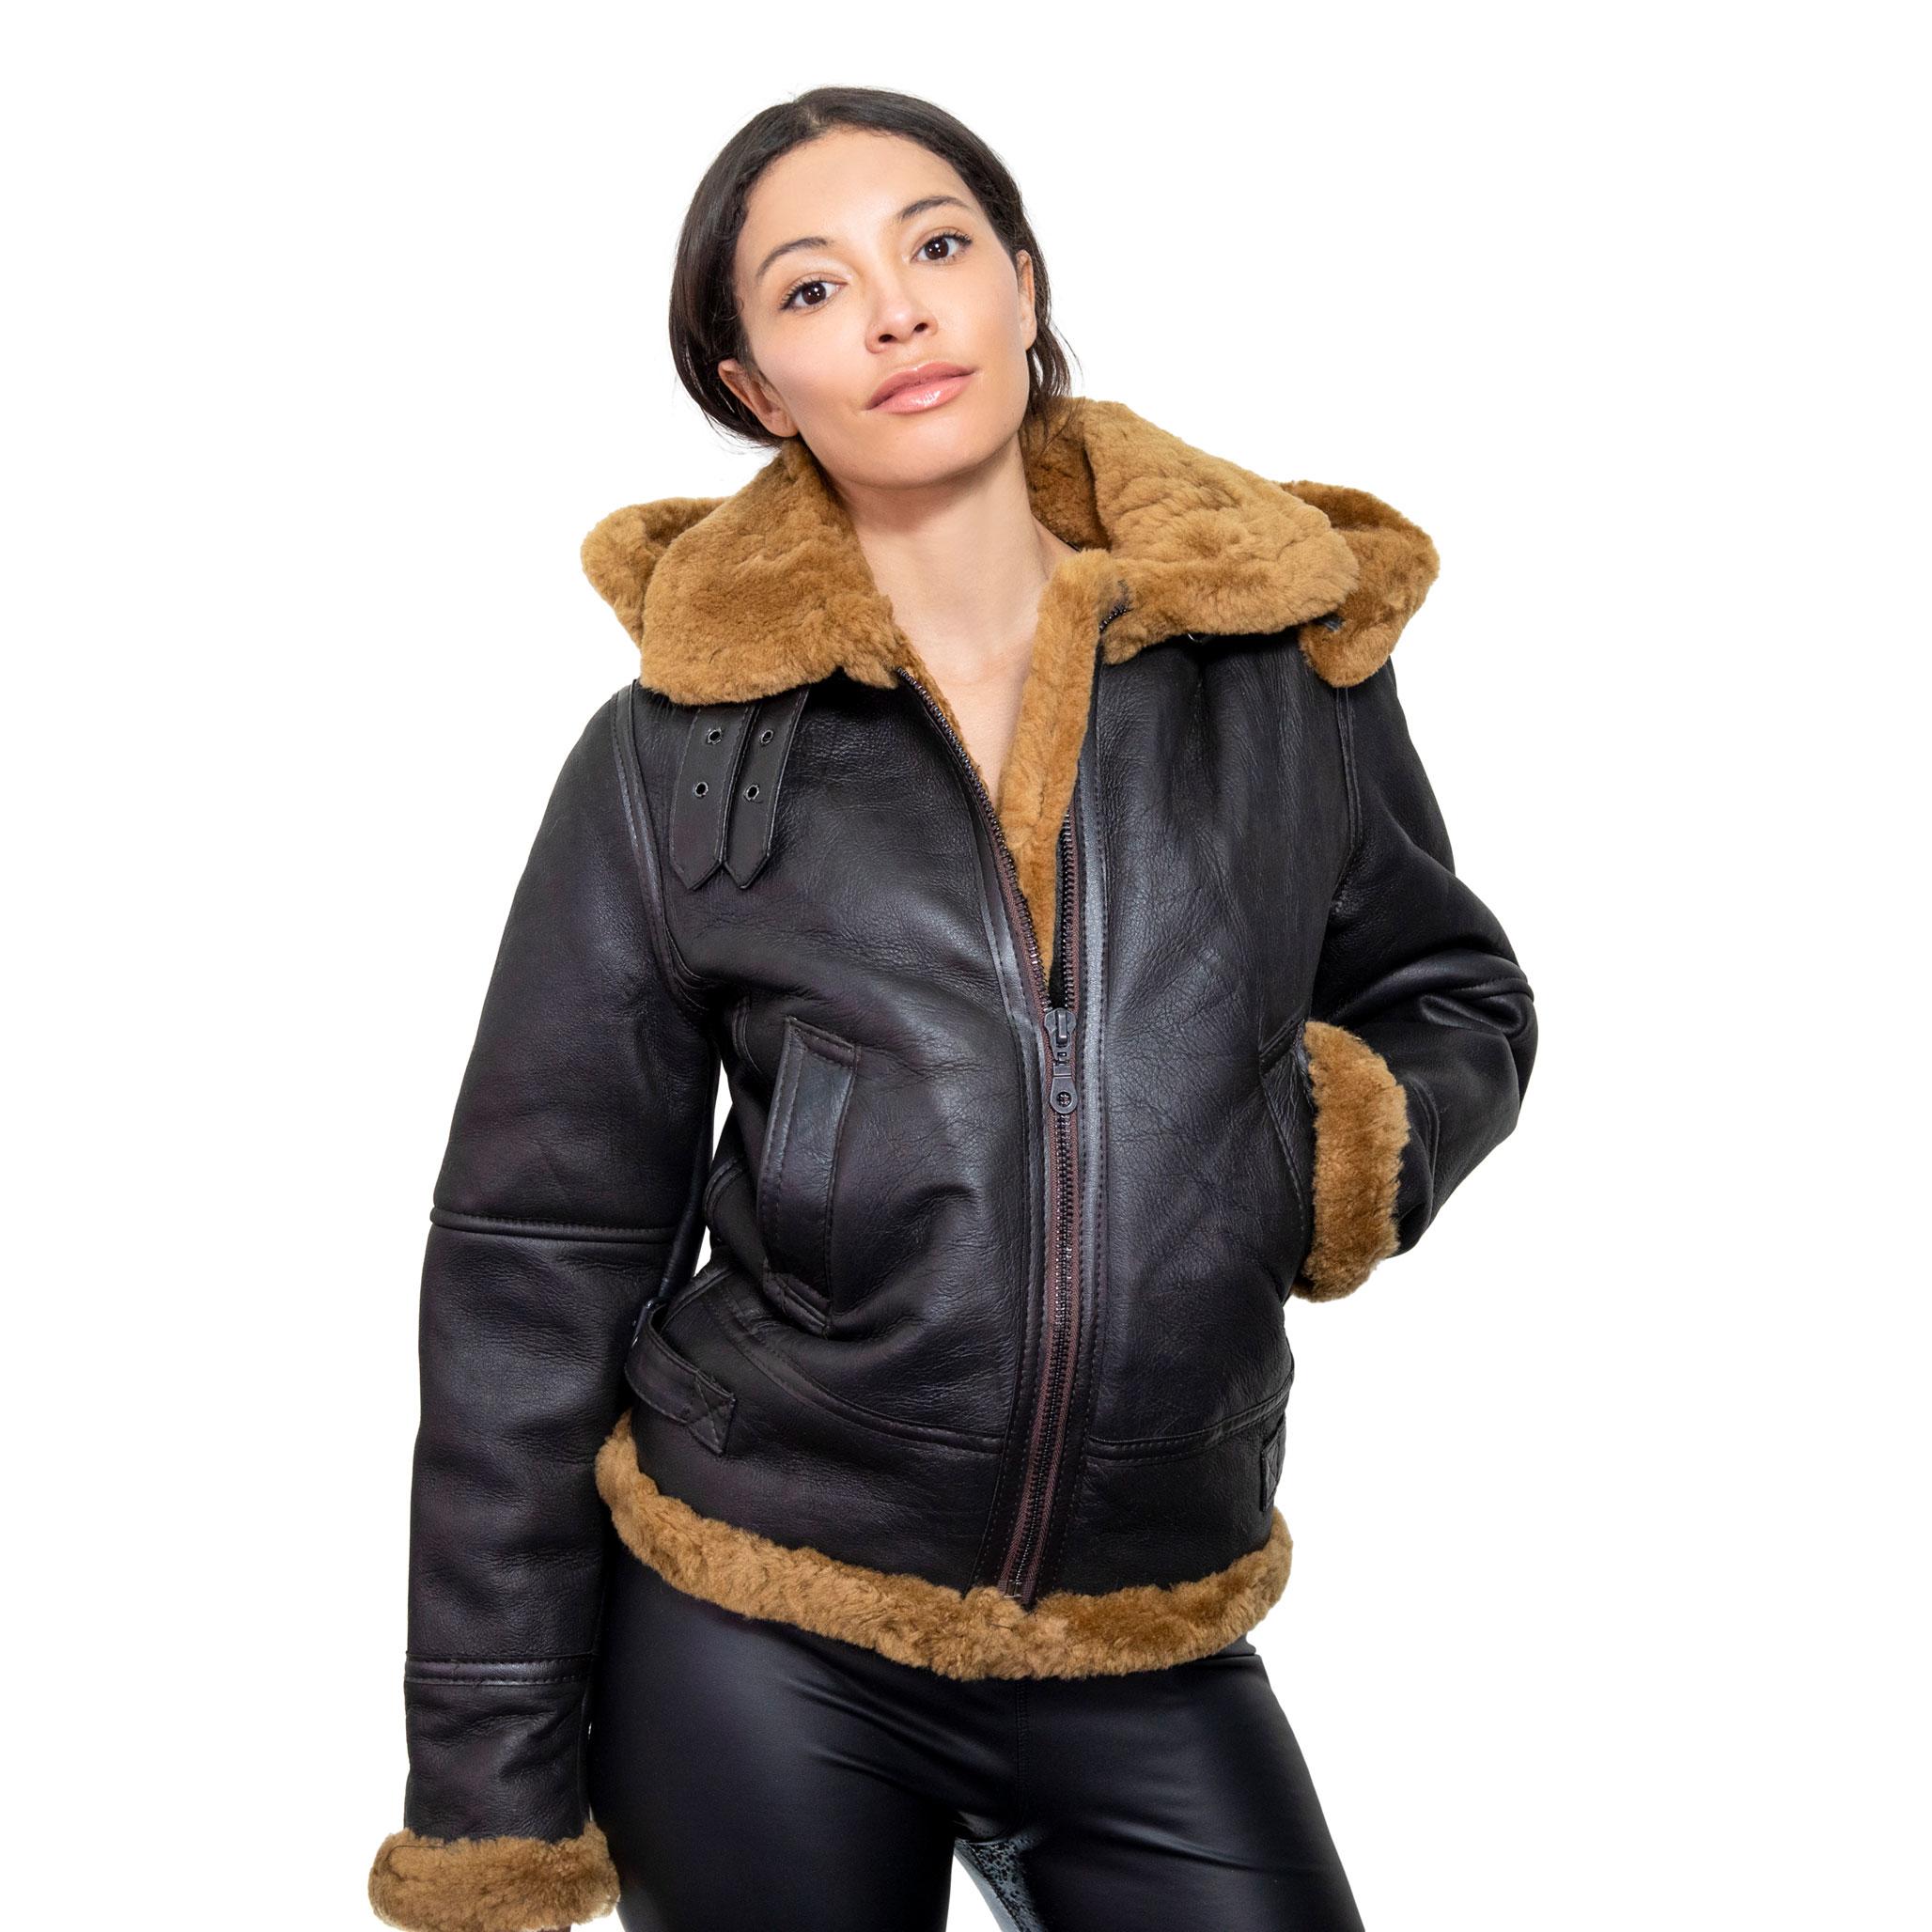 A female model wearing a hooded brown sheepskin jacket, with lush ginger inner fur.